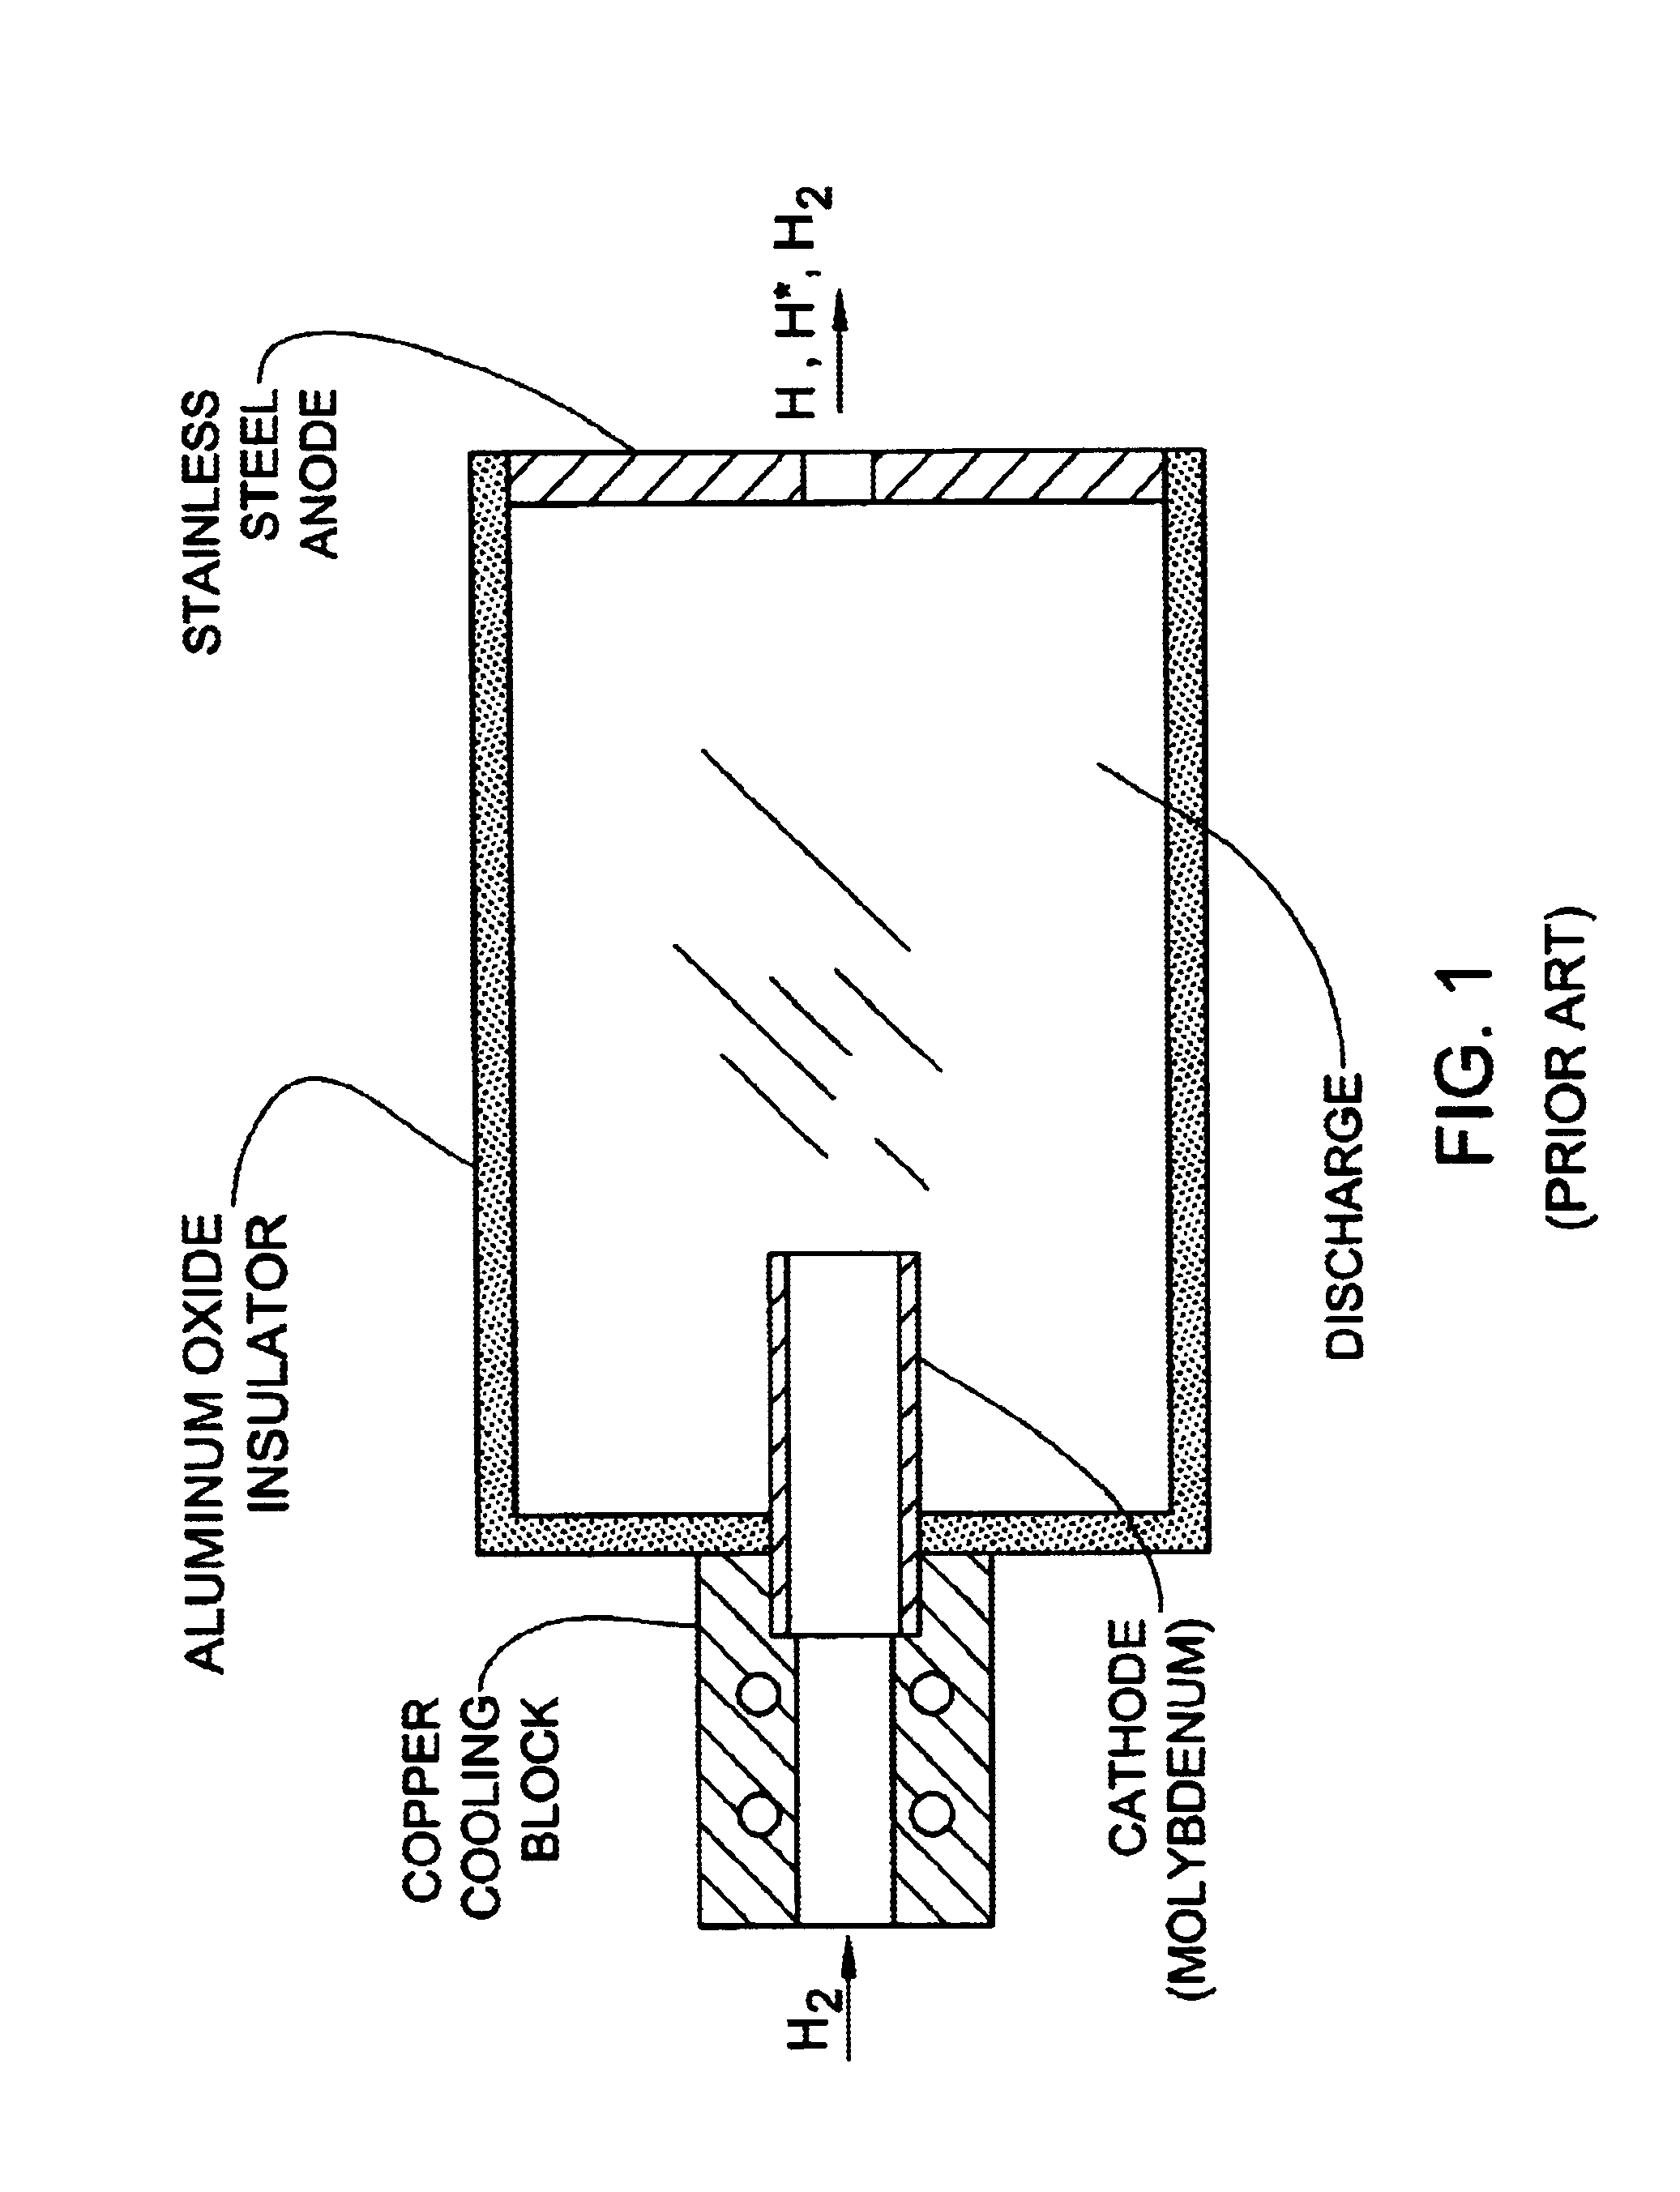 Method and apparatus for producing atomic flows of molecular gases